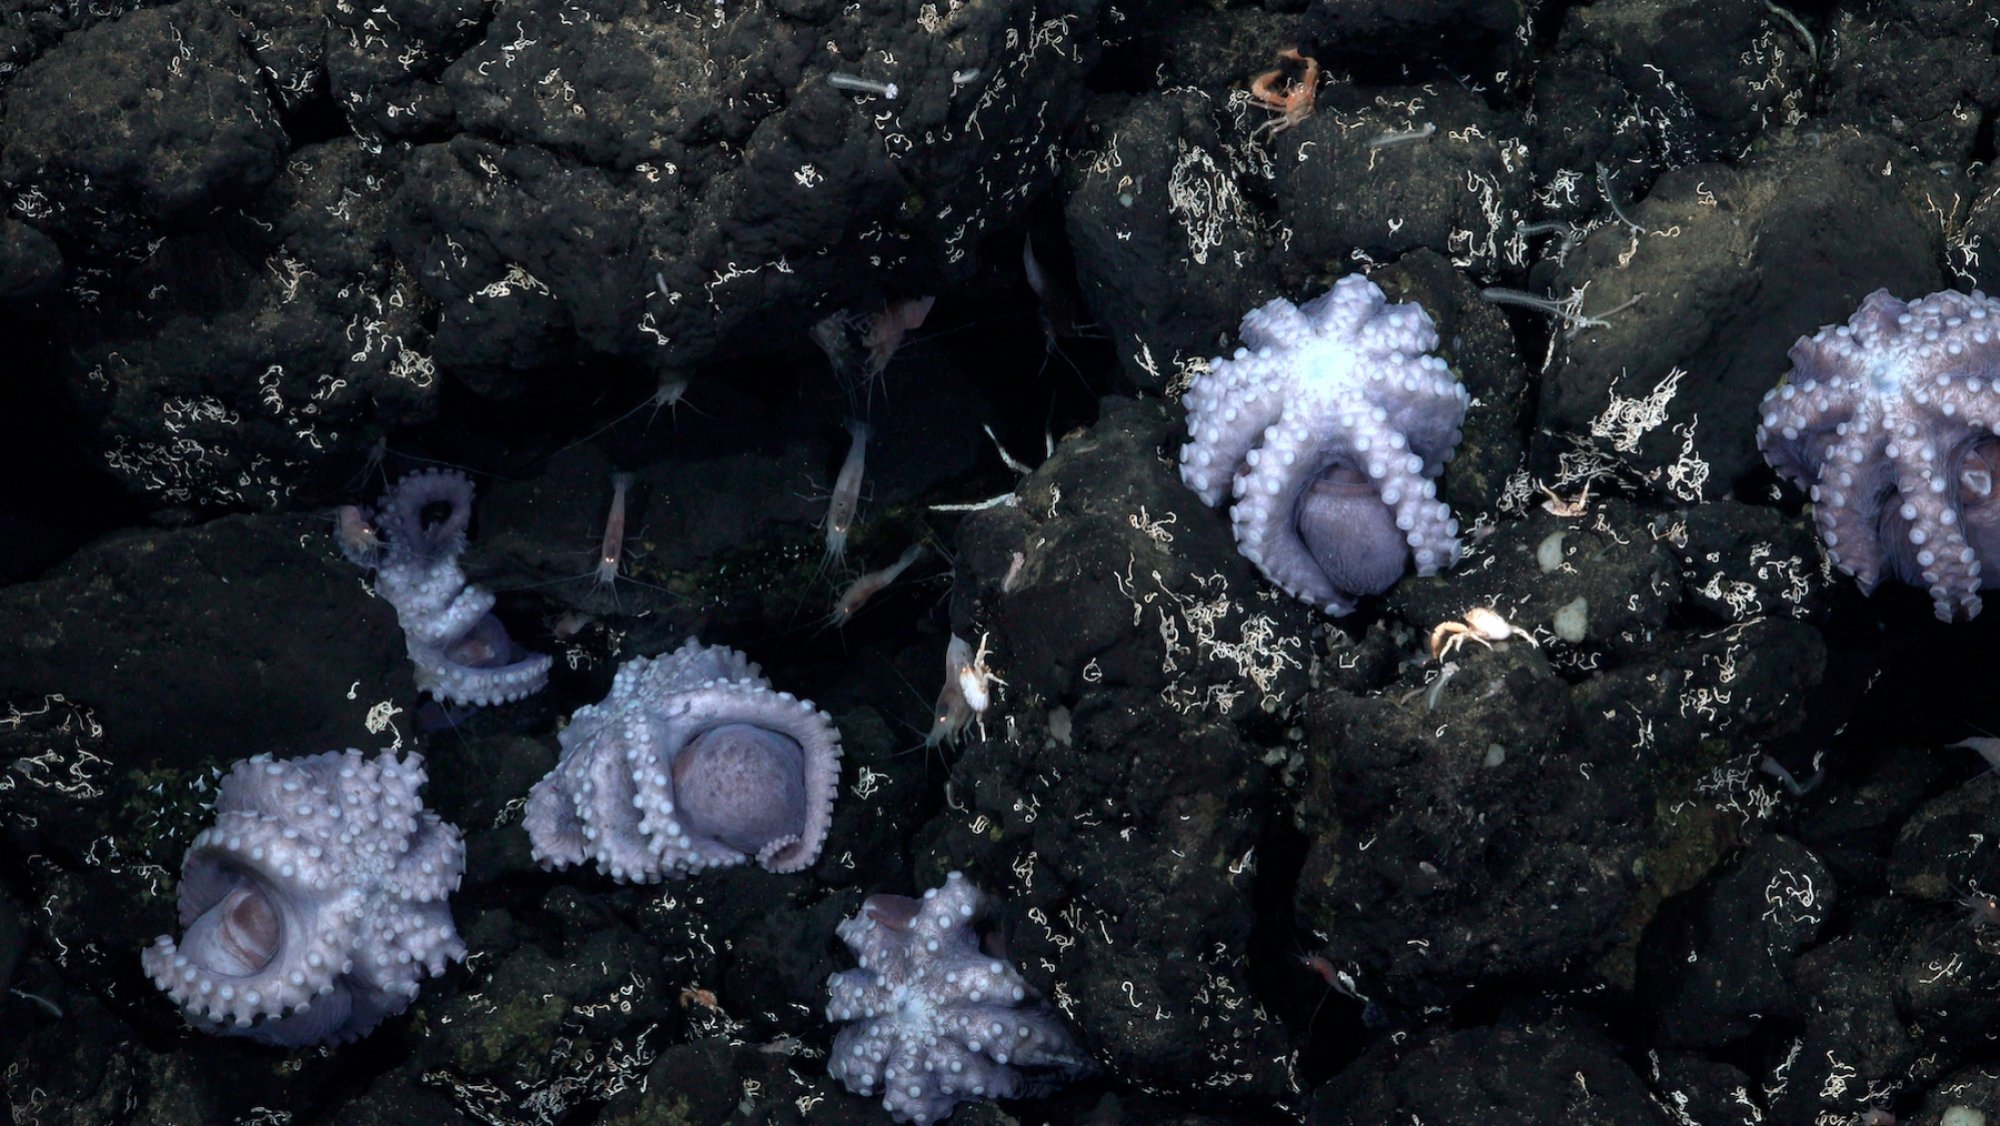 In a newly discovered octopus nursery, members of an octopus species guard their eggs.